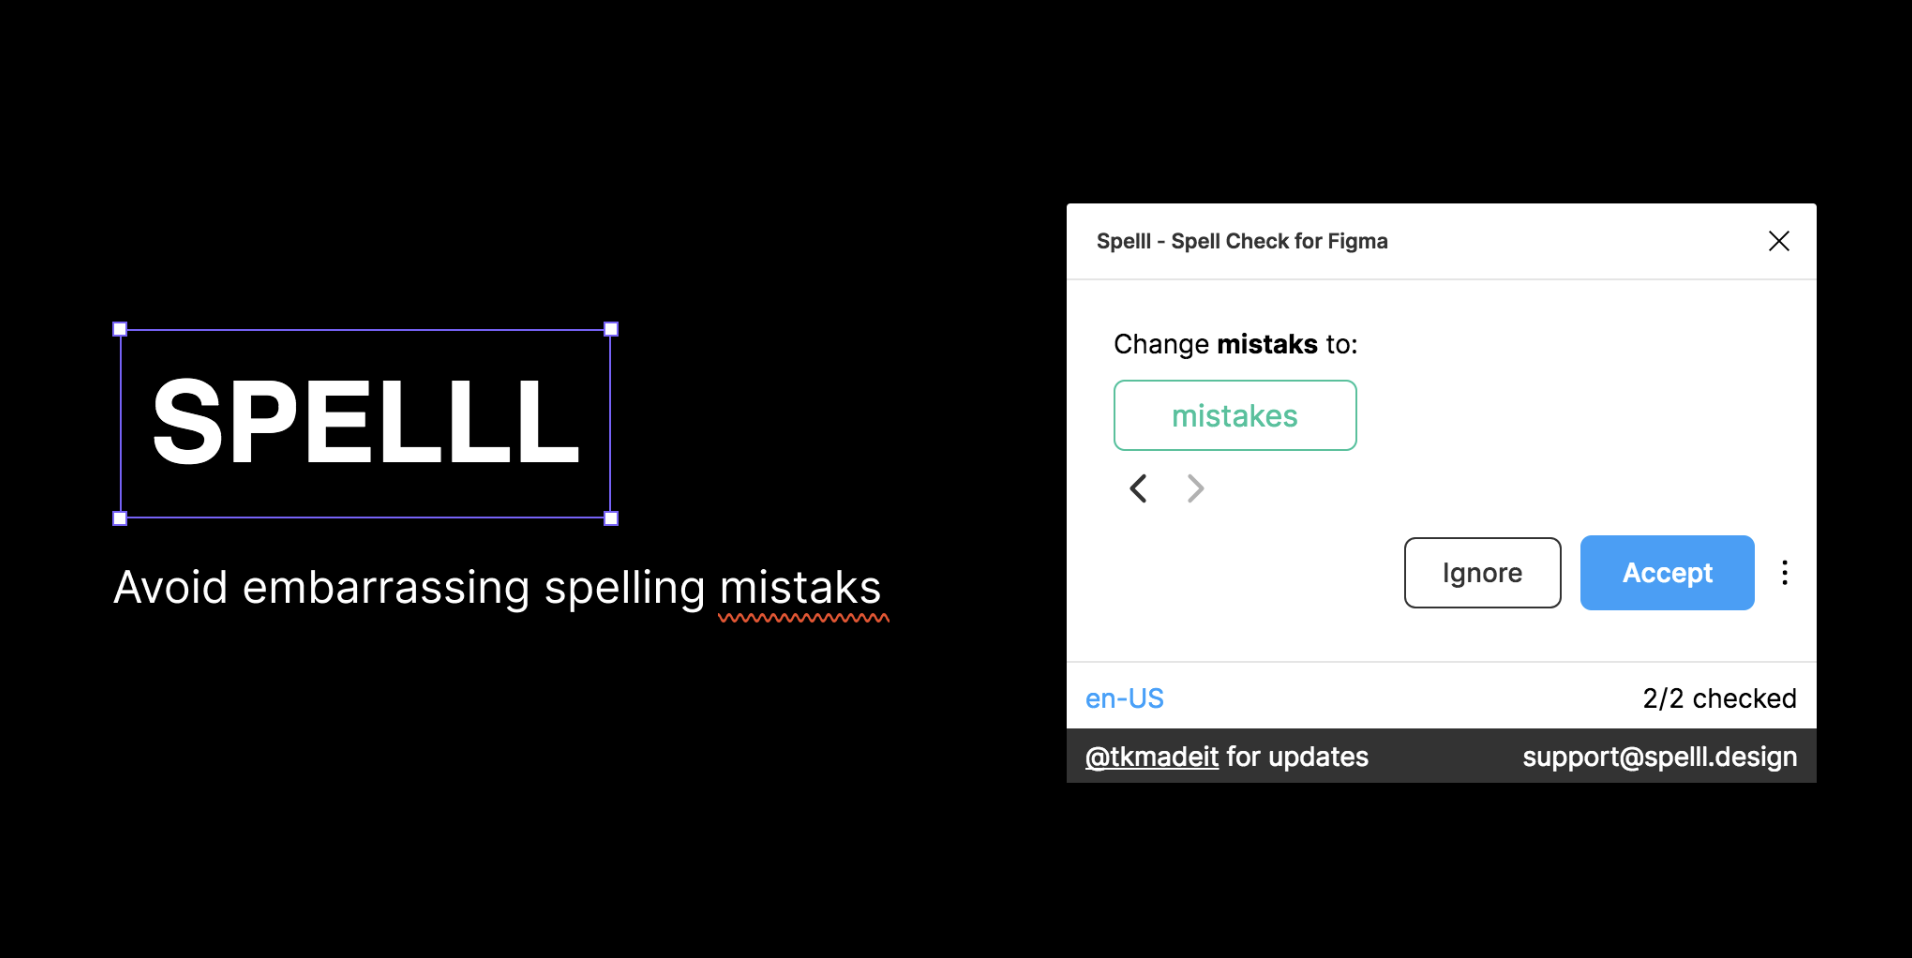 Screenshot of the Spelll tool with the text "Avoid embarrassing spelling mistaks" with a pop-up window with a Spell Check for Figma